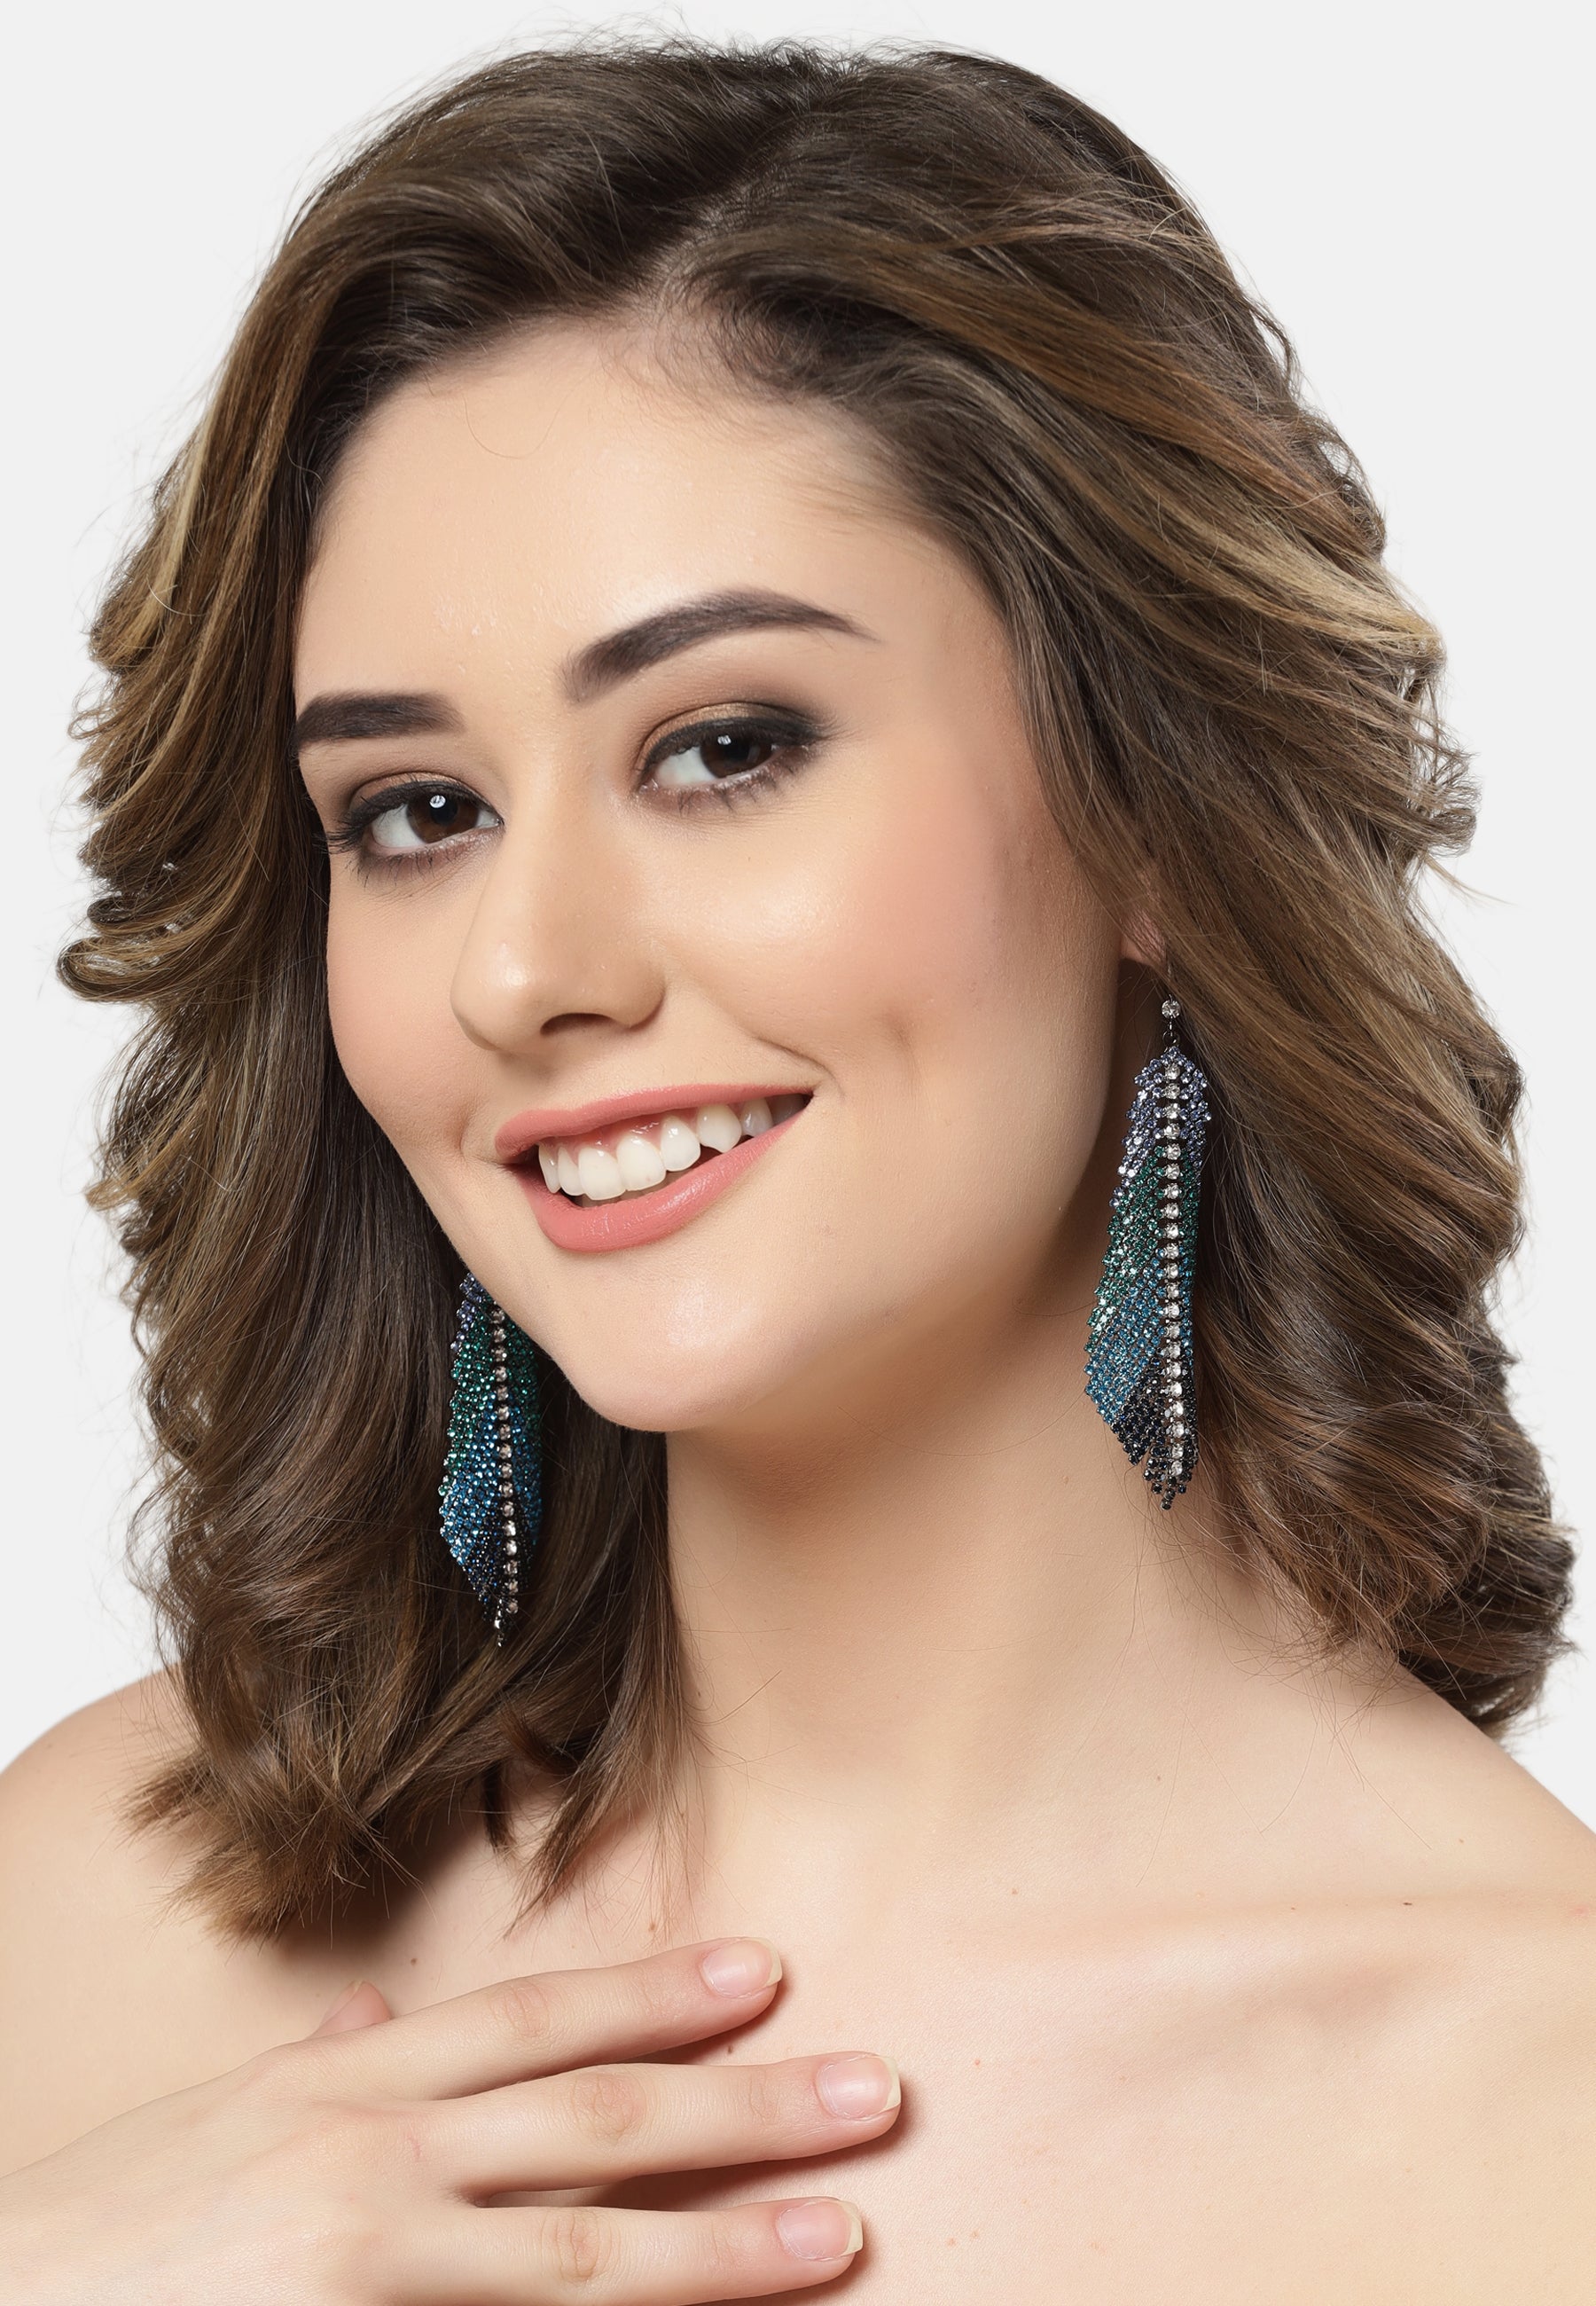 Criostail Cleite Earrings Studded